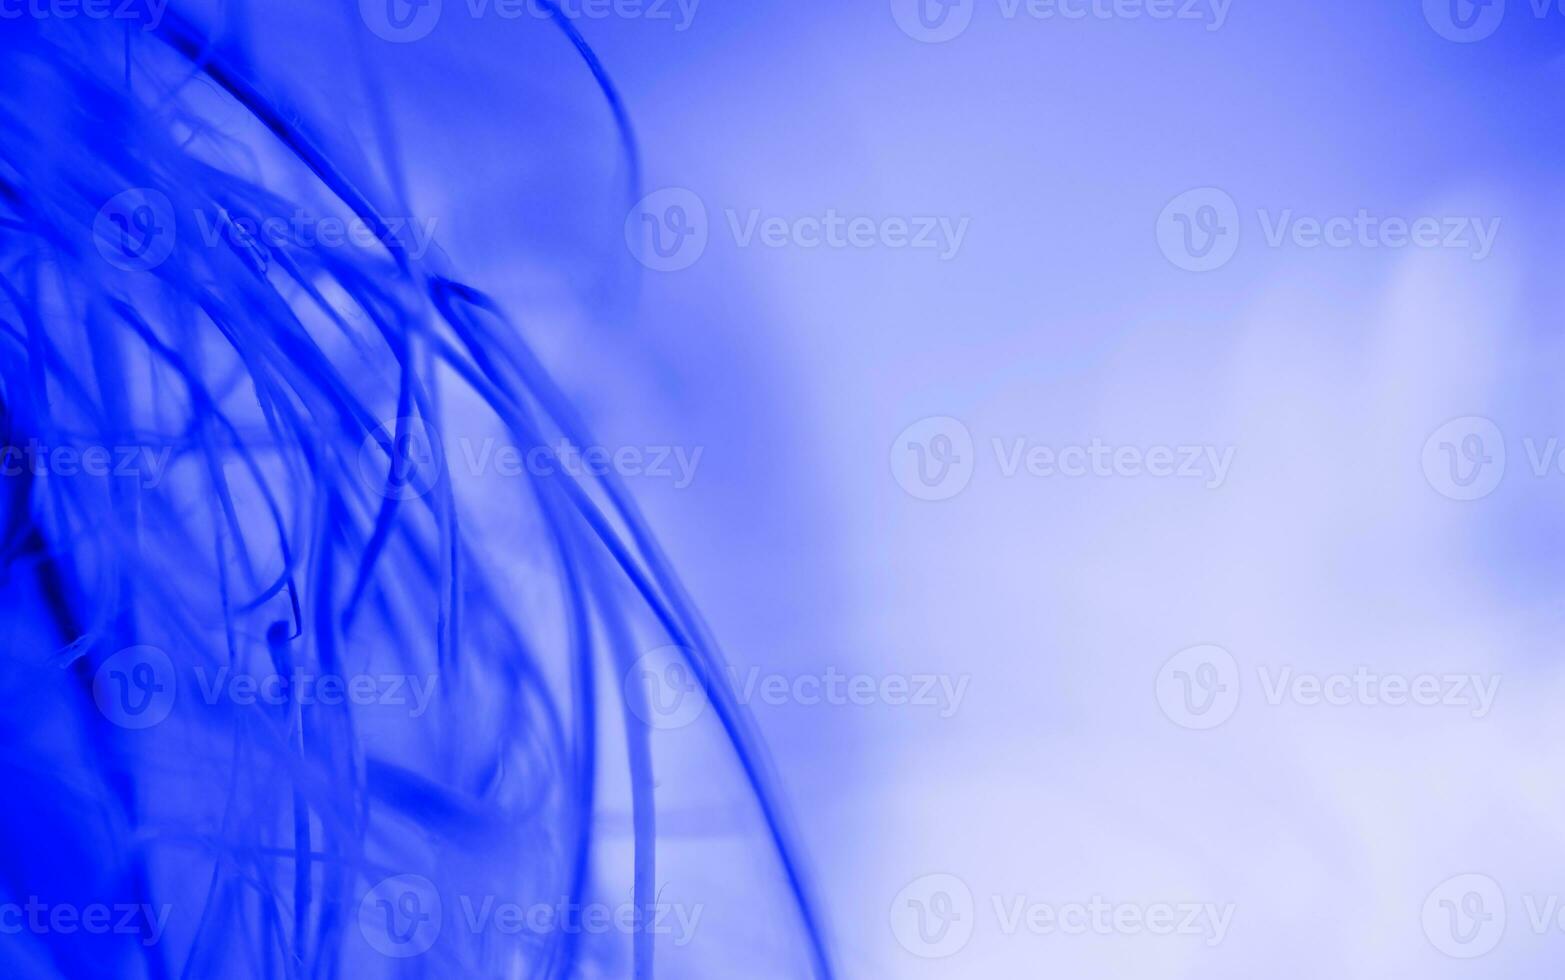 abstract weaving fibers background design photo